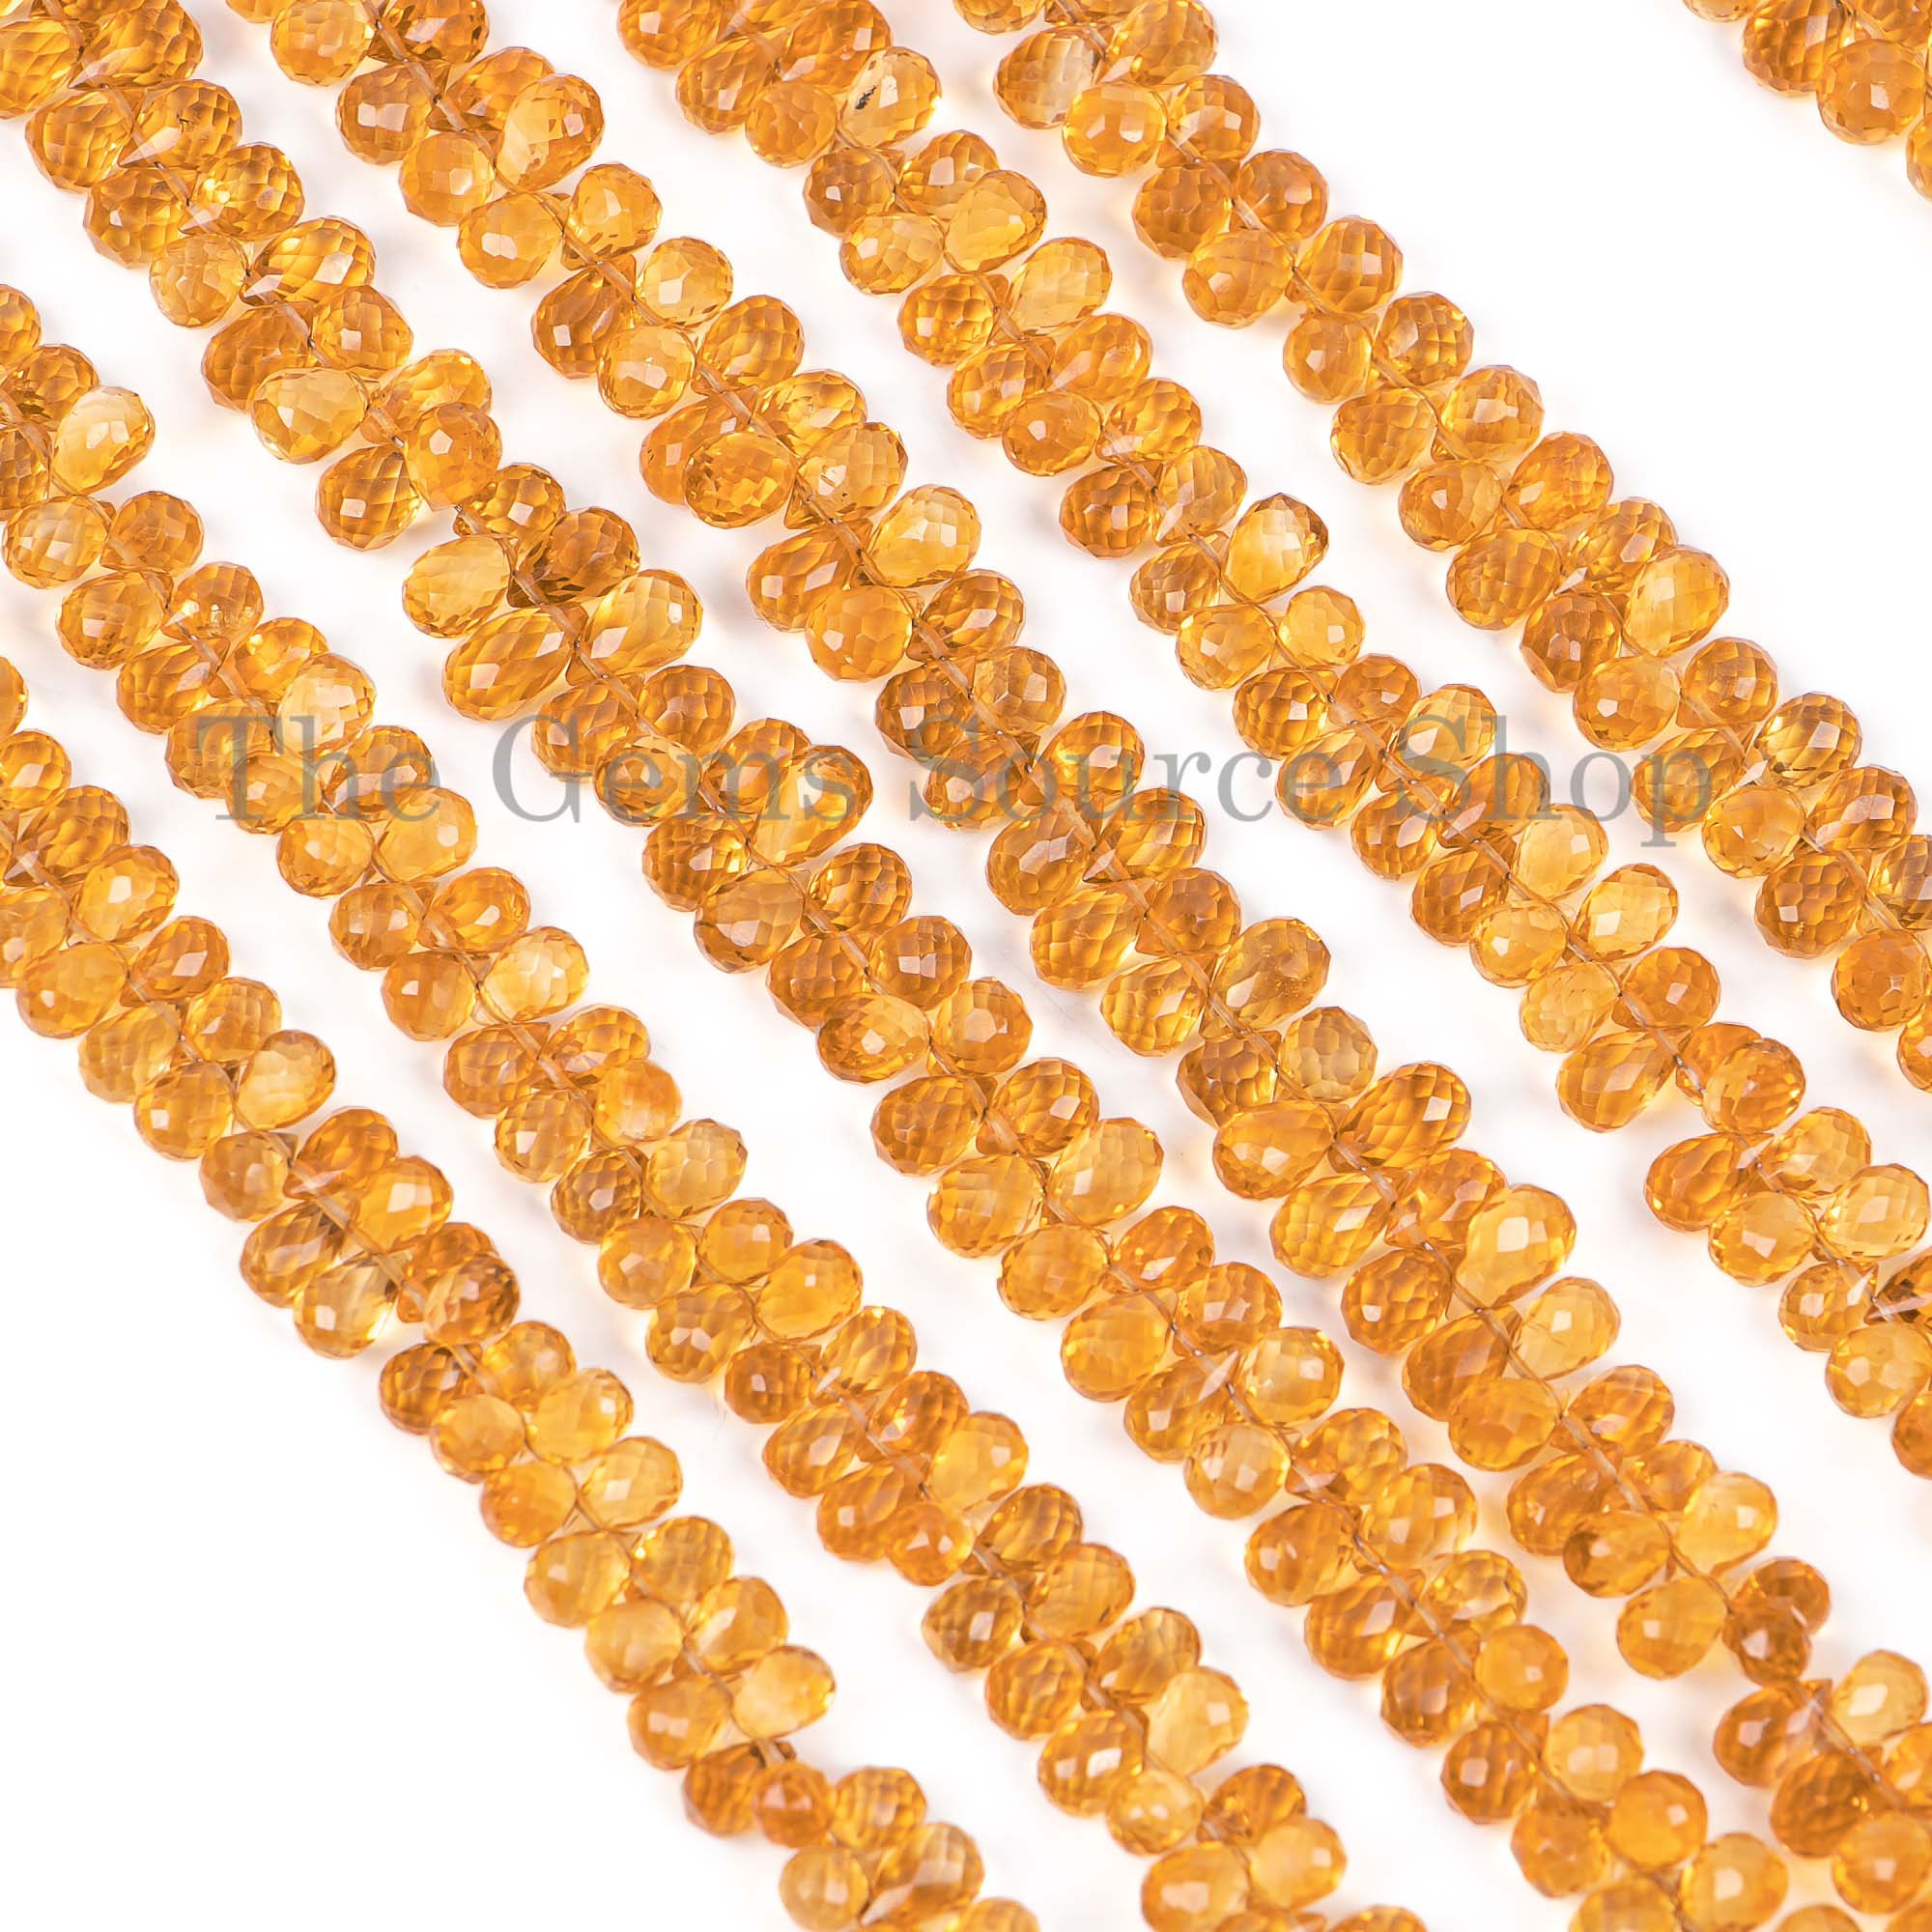 Natural Citrine Beads, Citrine Faceted Drop Shape Beads, Citrine Briolette, Wholesale Beads